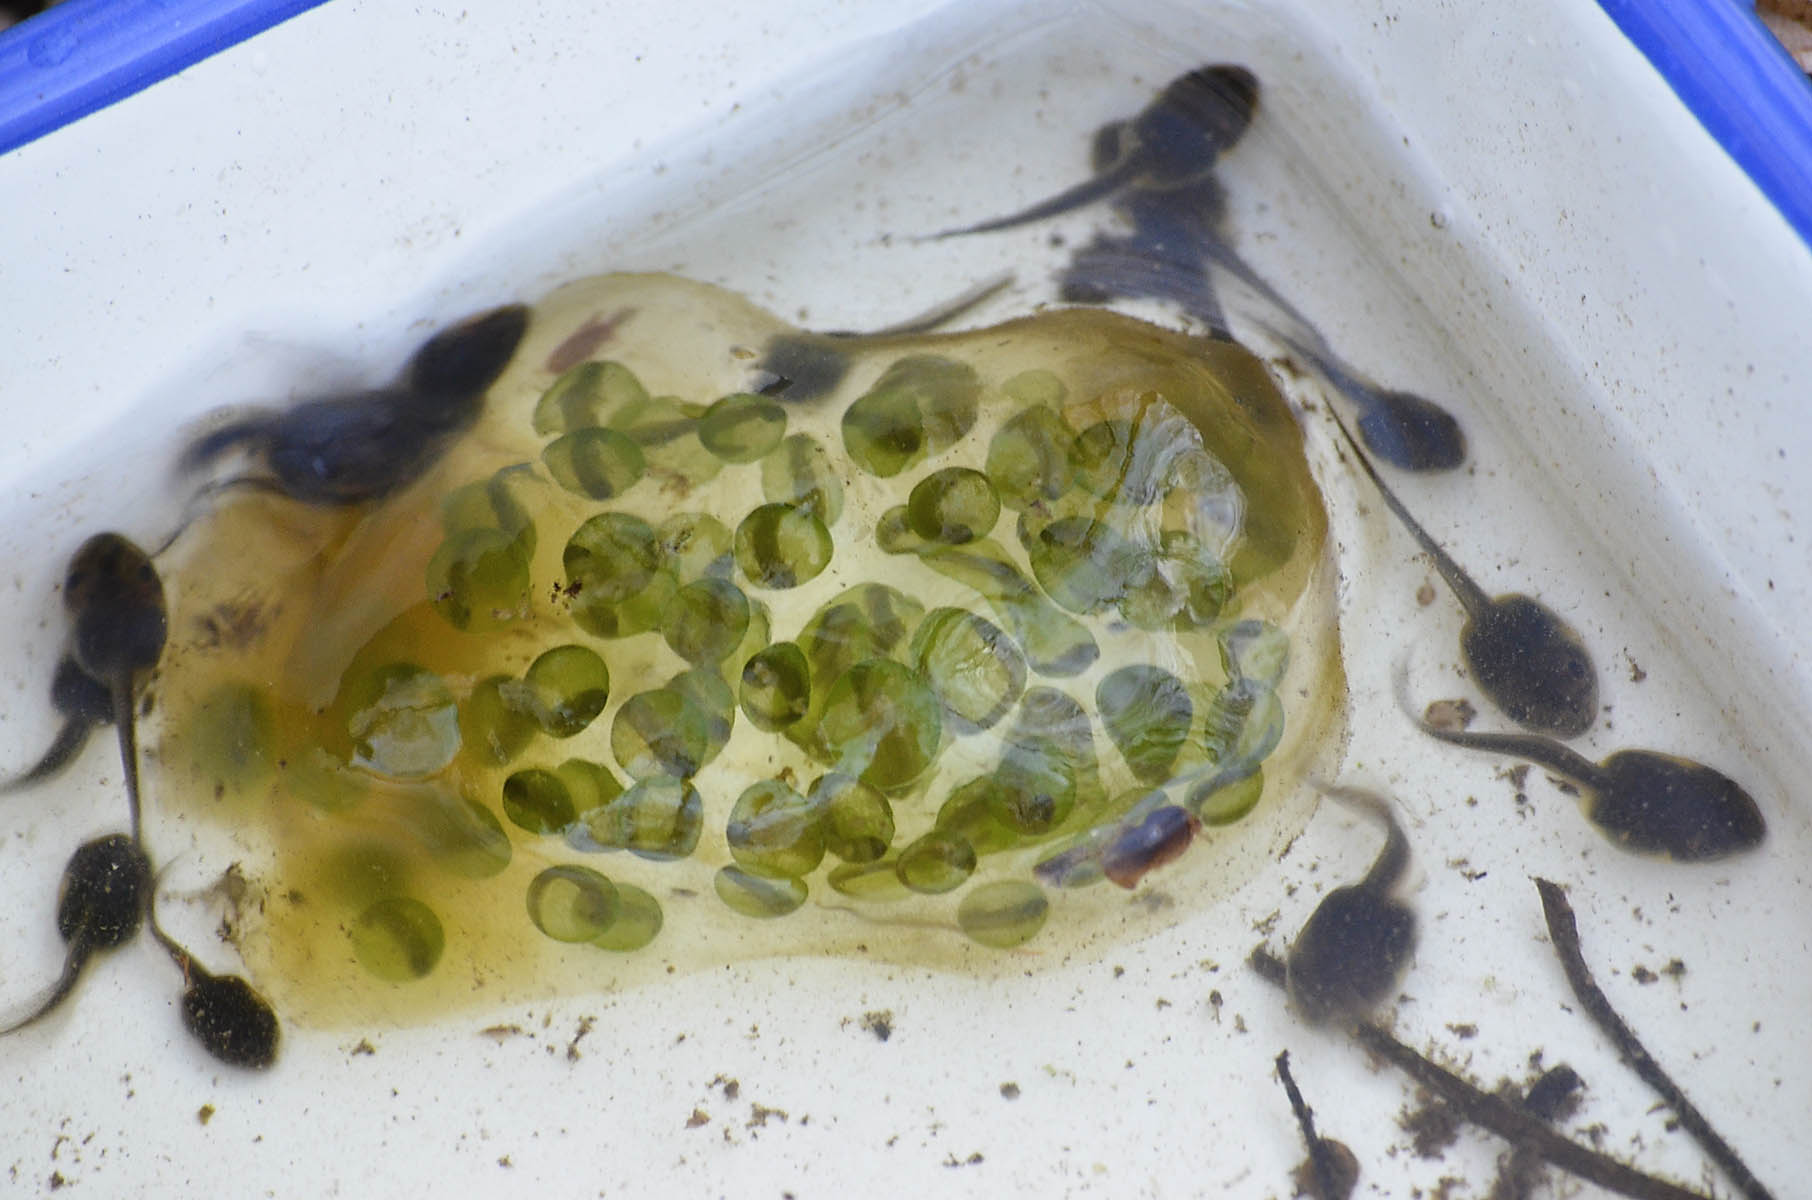 Spotted Salamander Egg Mass surrounded by Wood Frog Tadpoles